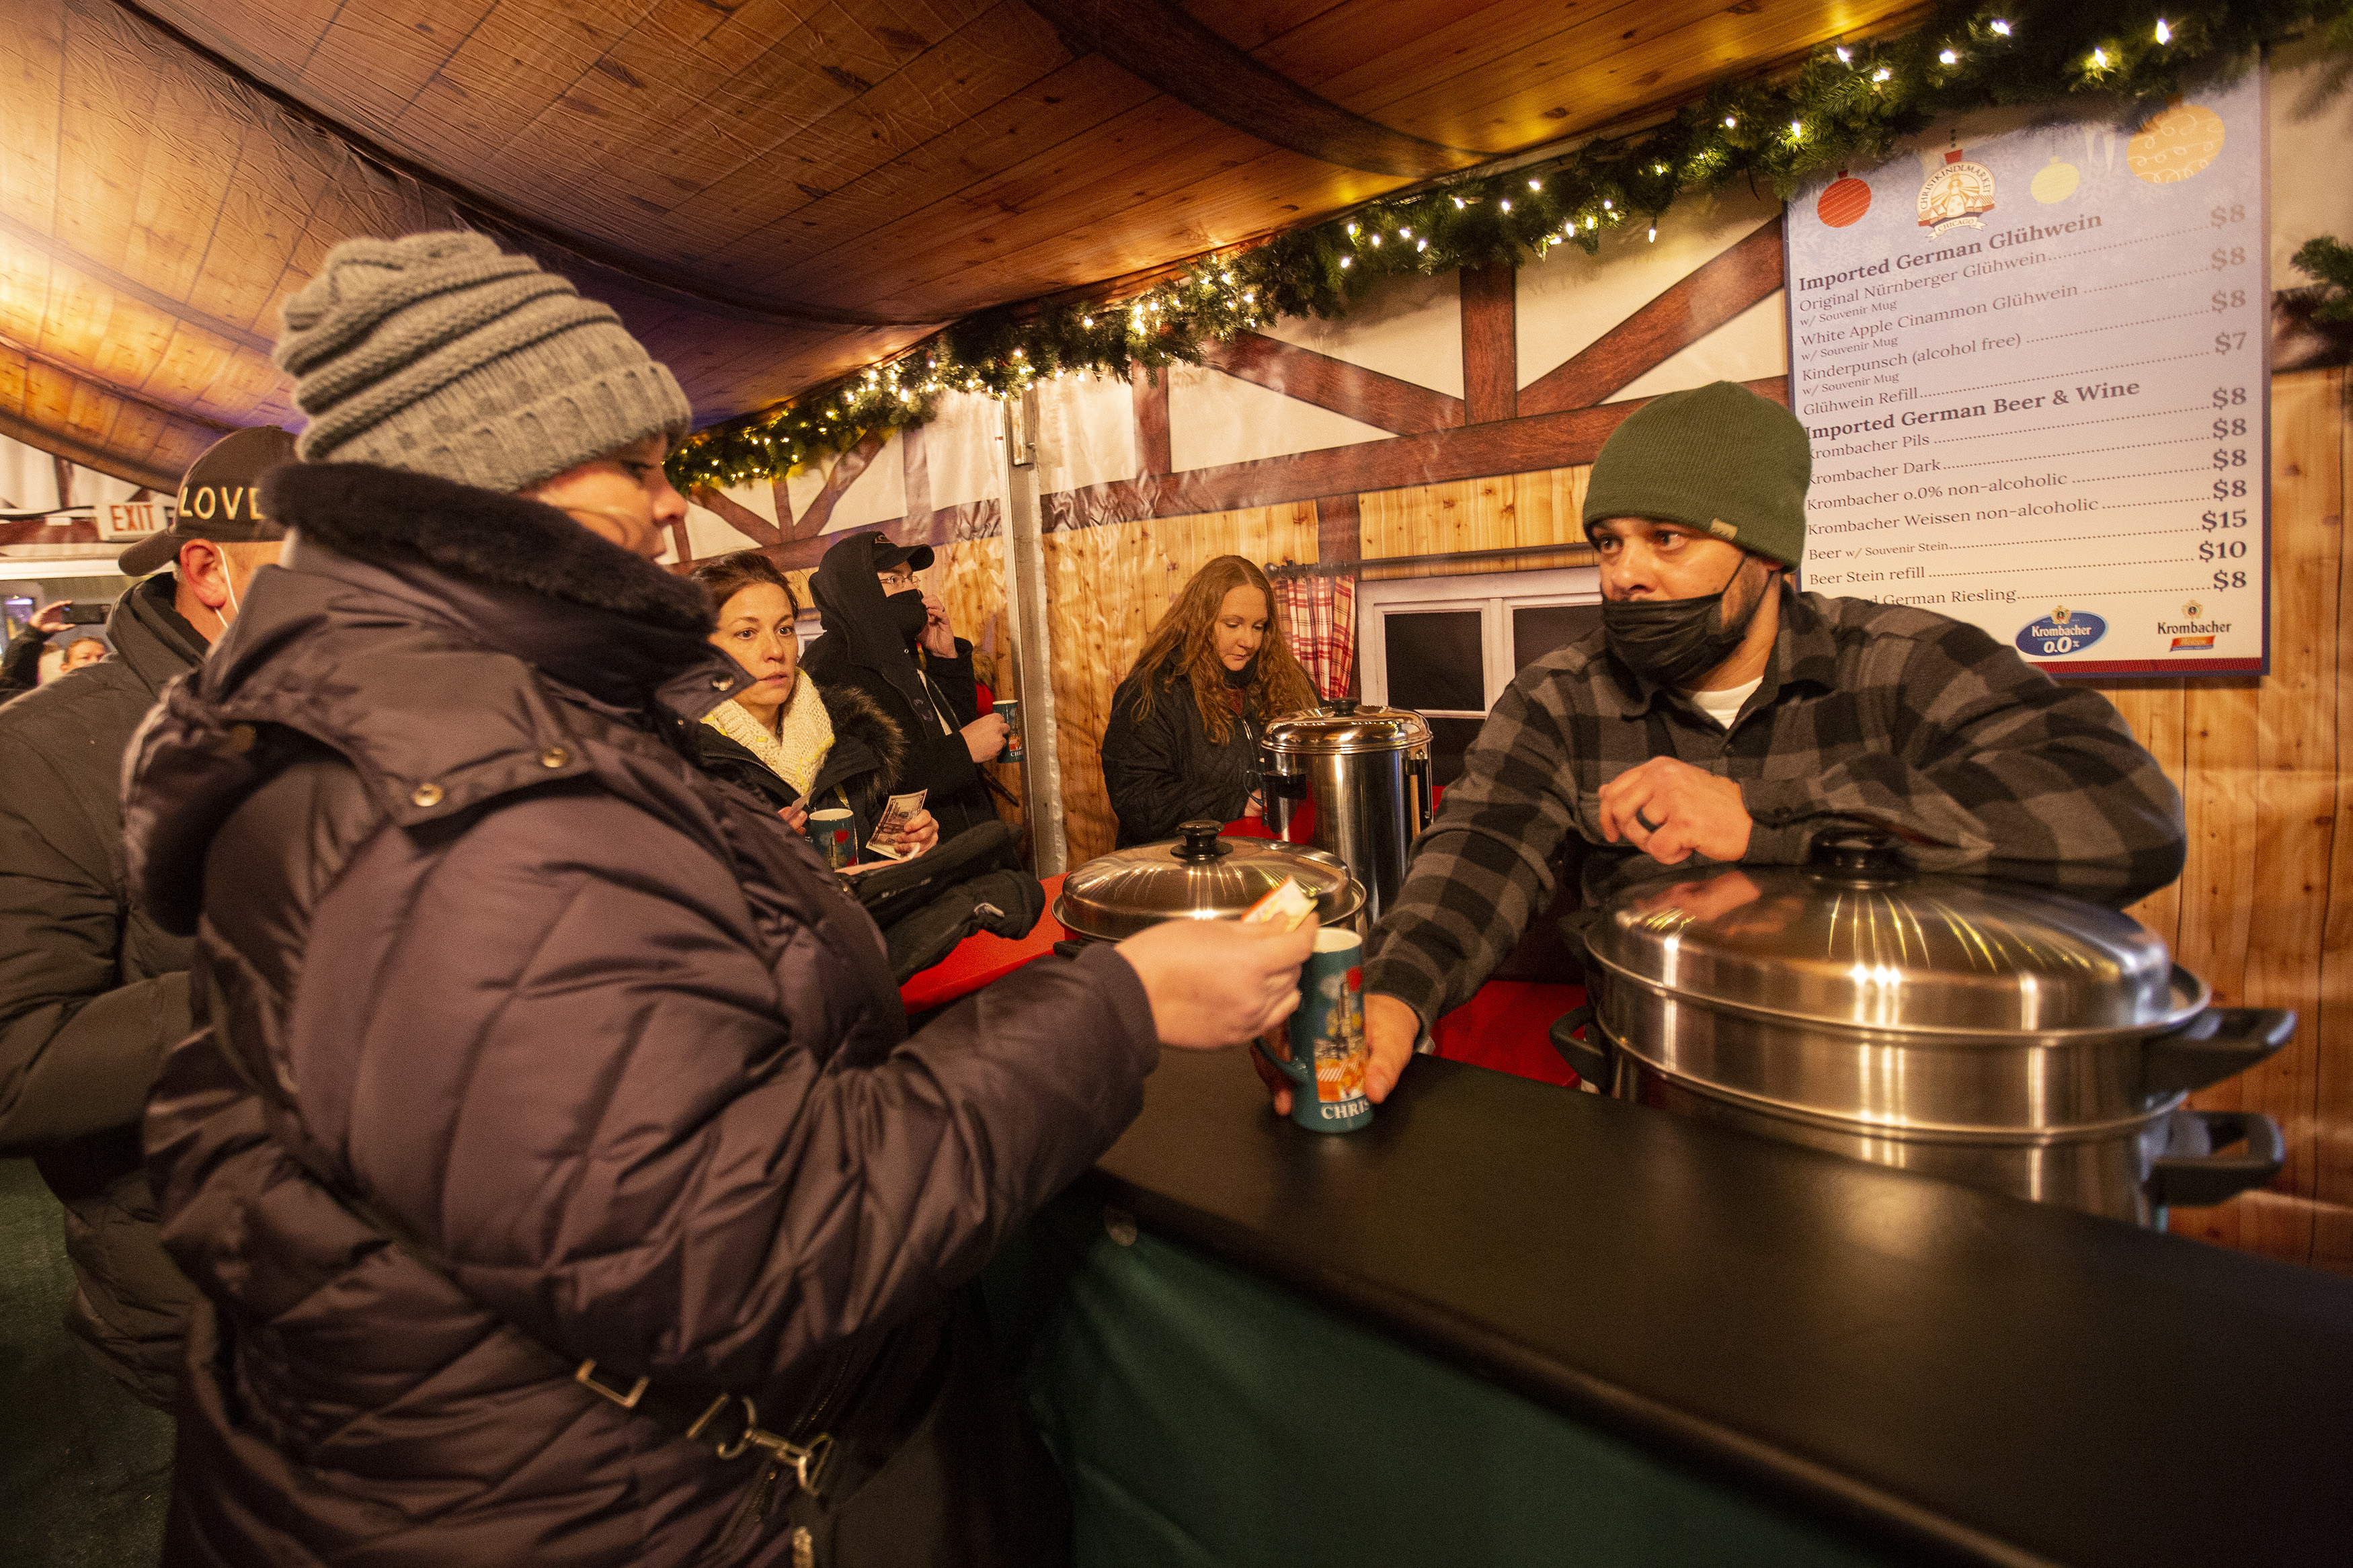 A man hands a mug of hot, mulled wine to a woman from behind a wooden outdoor bar.